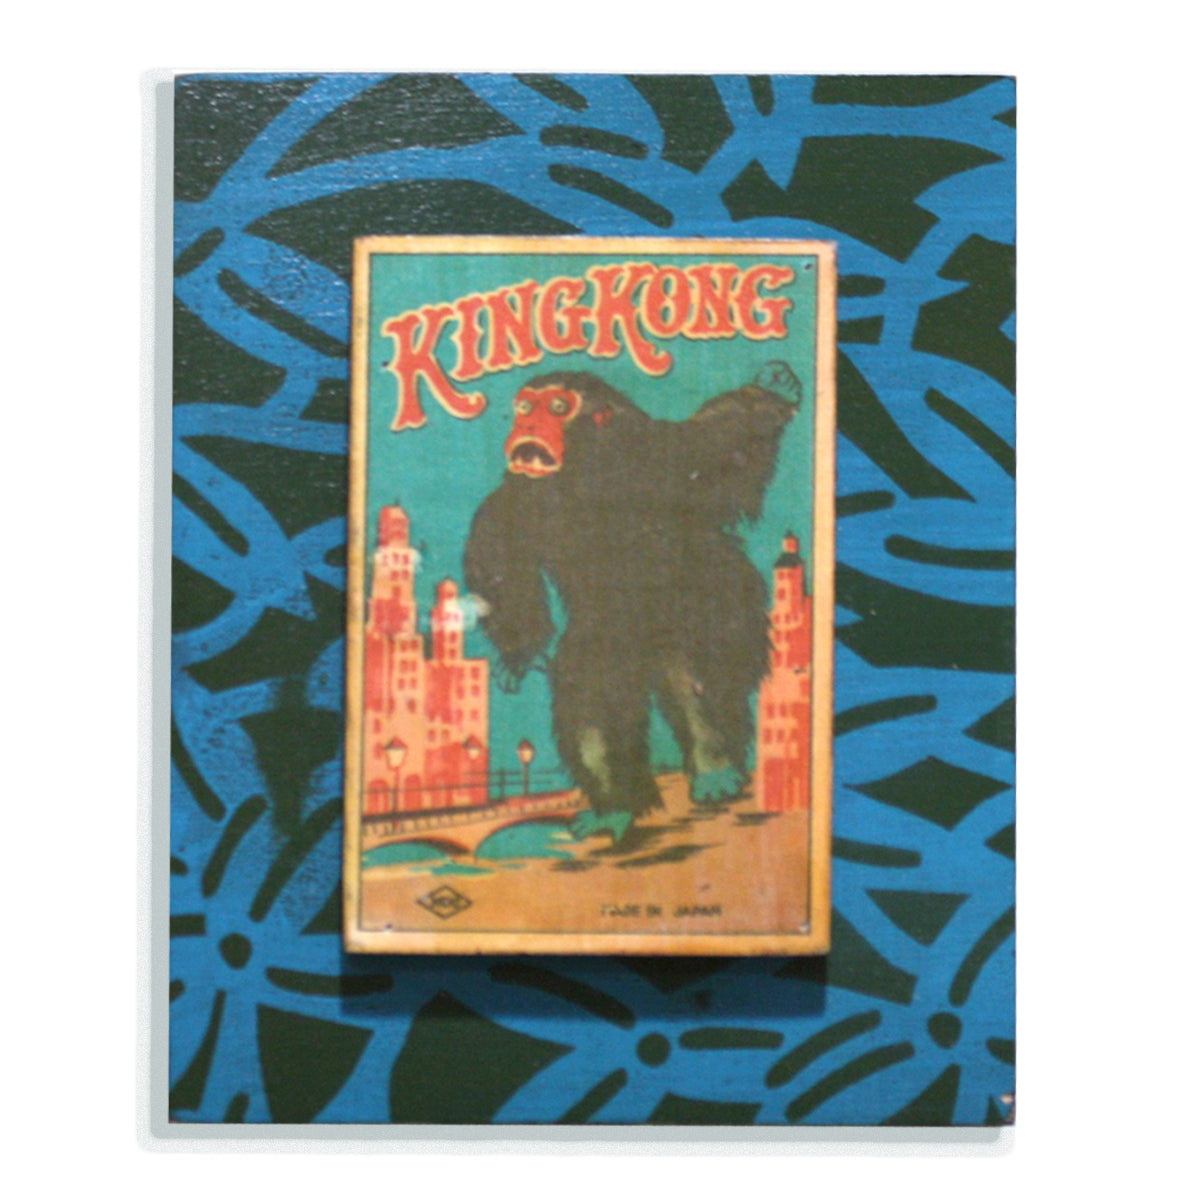 King Kong on blue and green